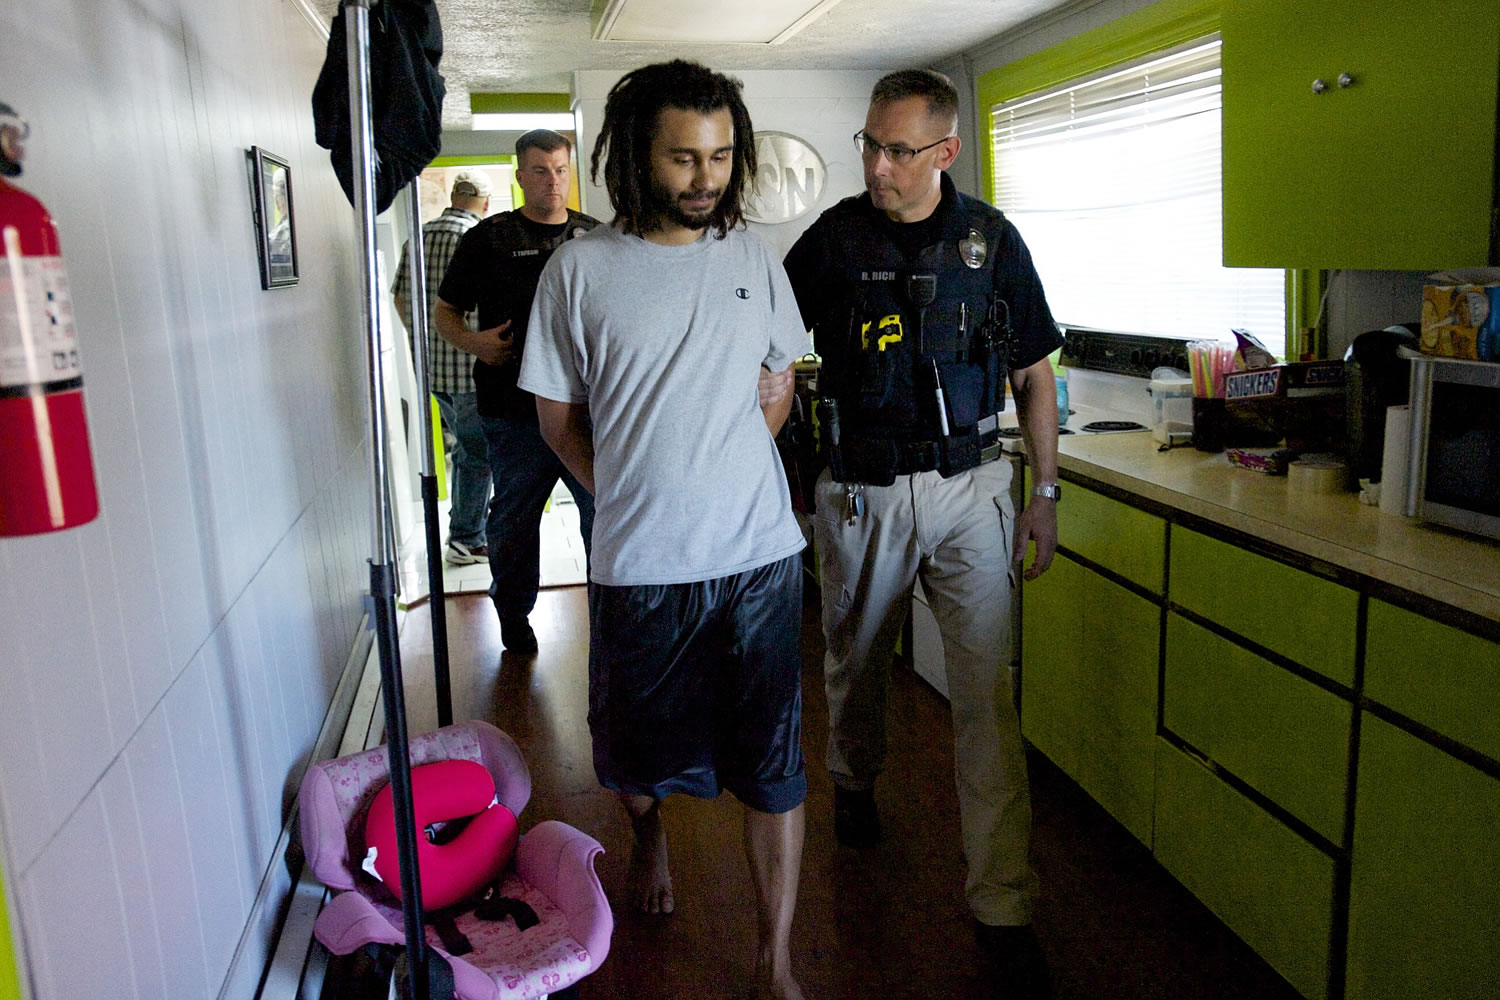 A warrant is served at the home of Adam Alexander, owner of Grow Systems Northwest, onThursday.